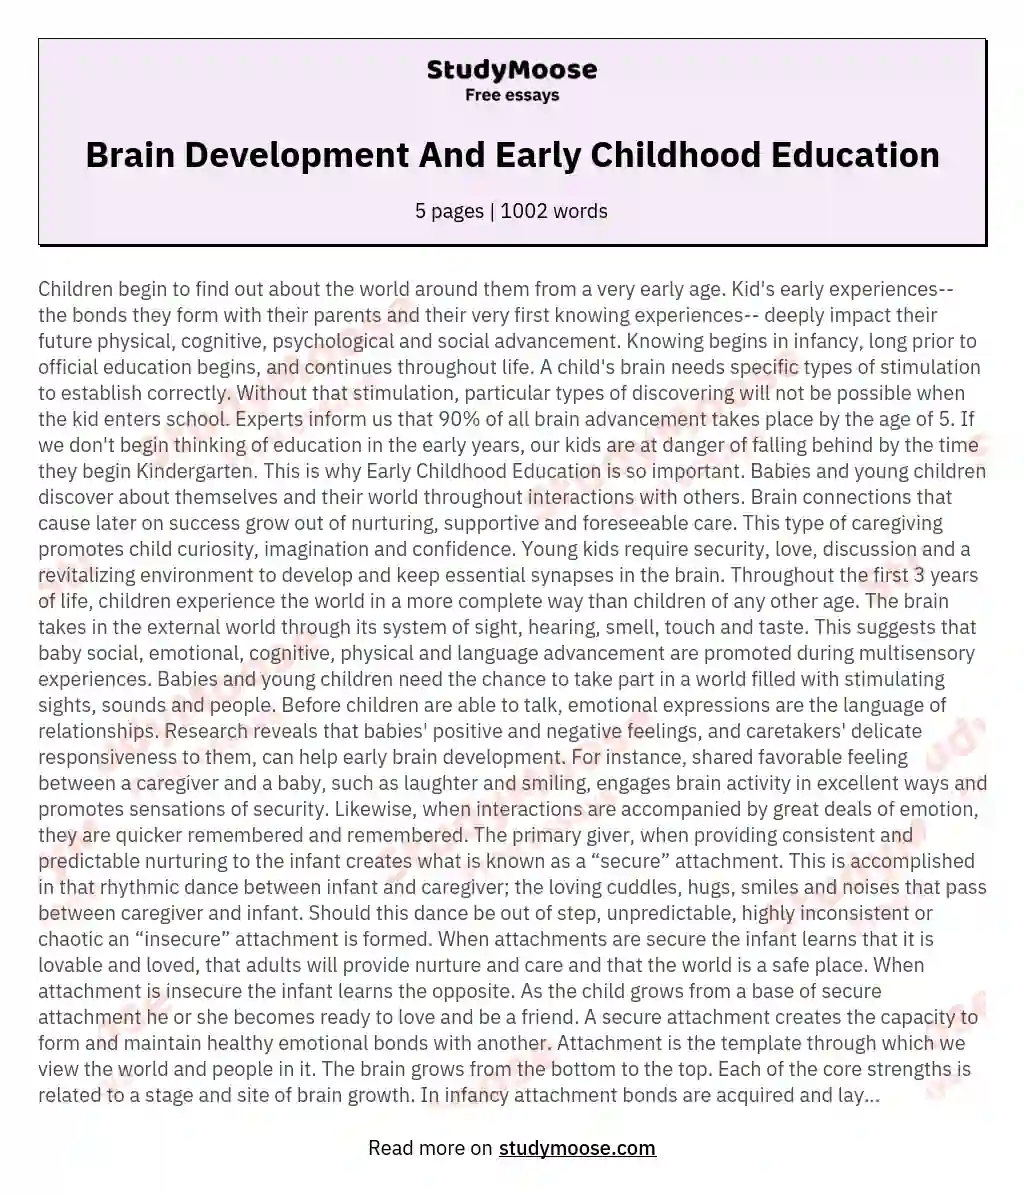 research topics early childhood development